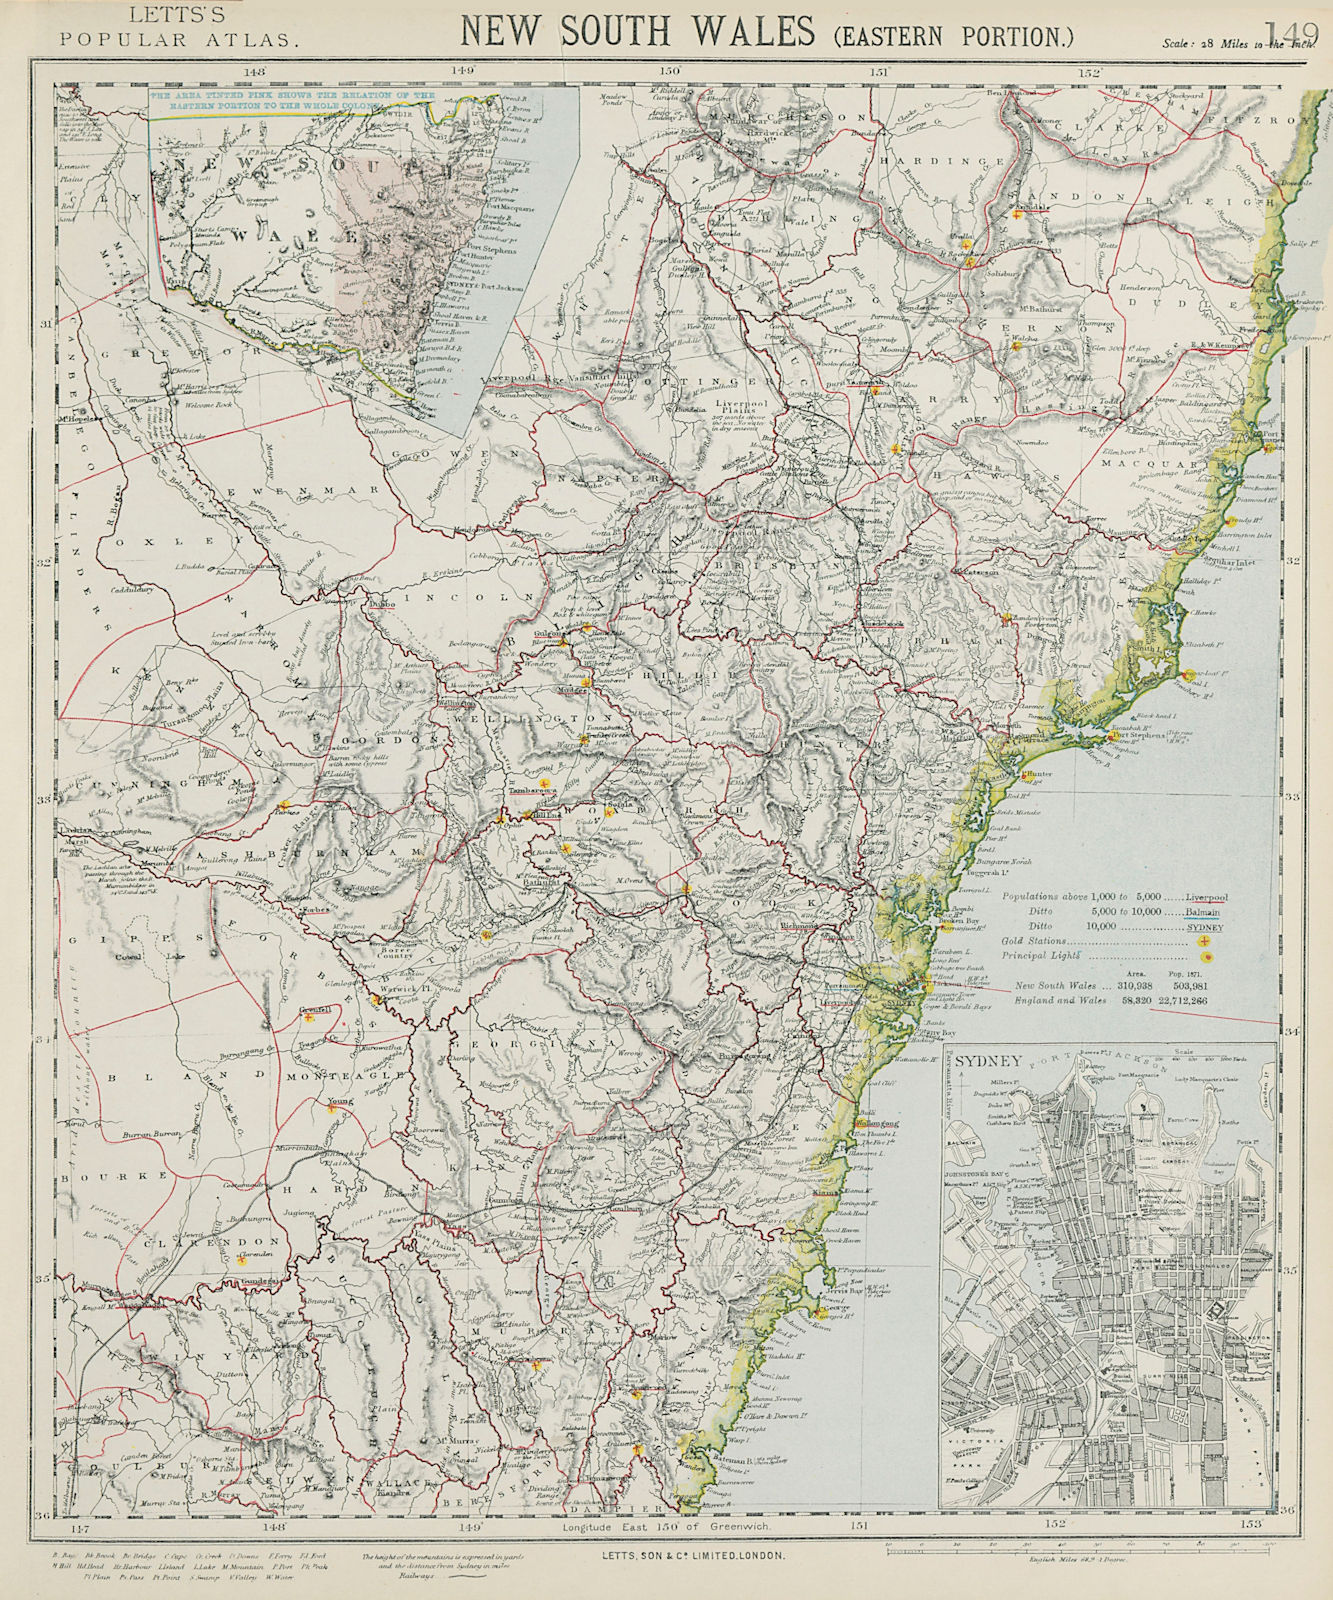 Associate Product NEW SOUTH WALES showing gold mining stations. Sydney city plan. LETTS 1884 map